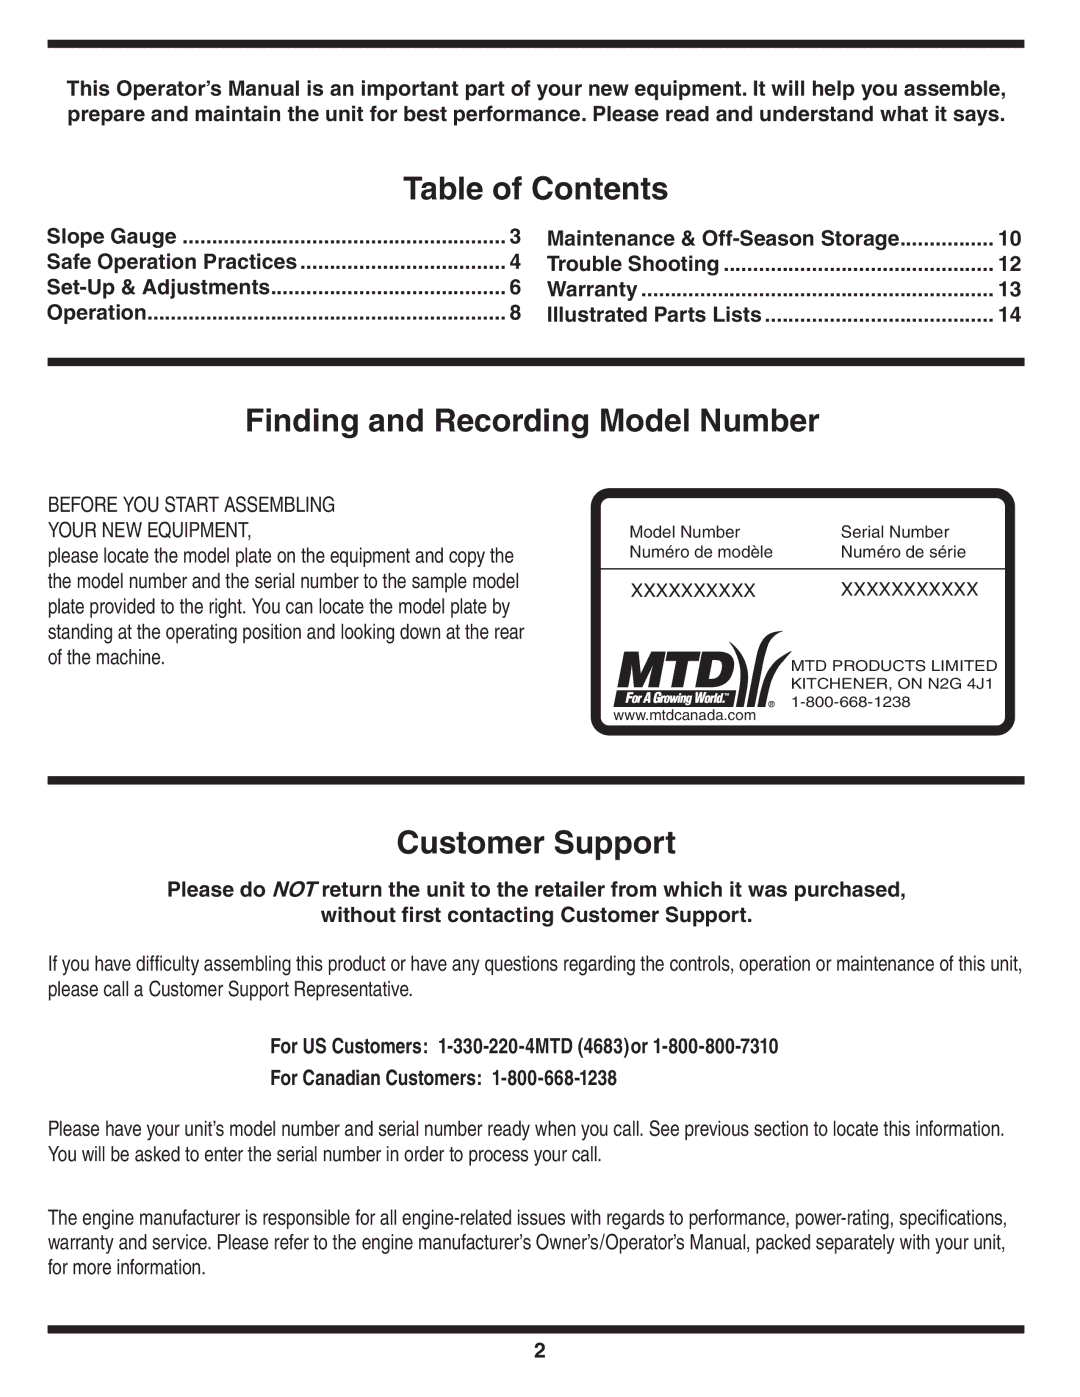 MTD 540-580 Series warranty Table of Contents, Finding and Recording Model Number, Customer Support 